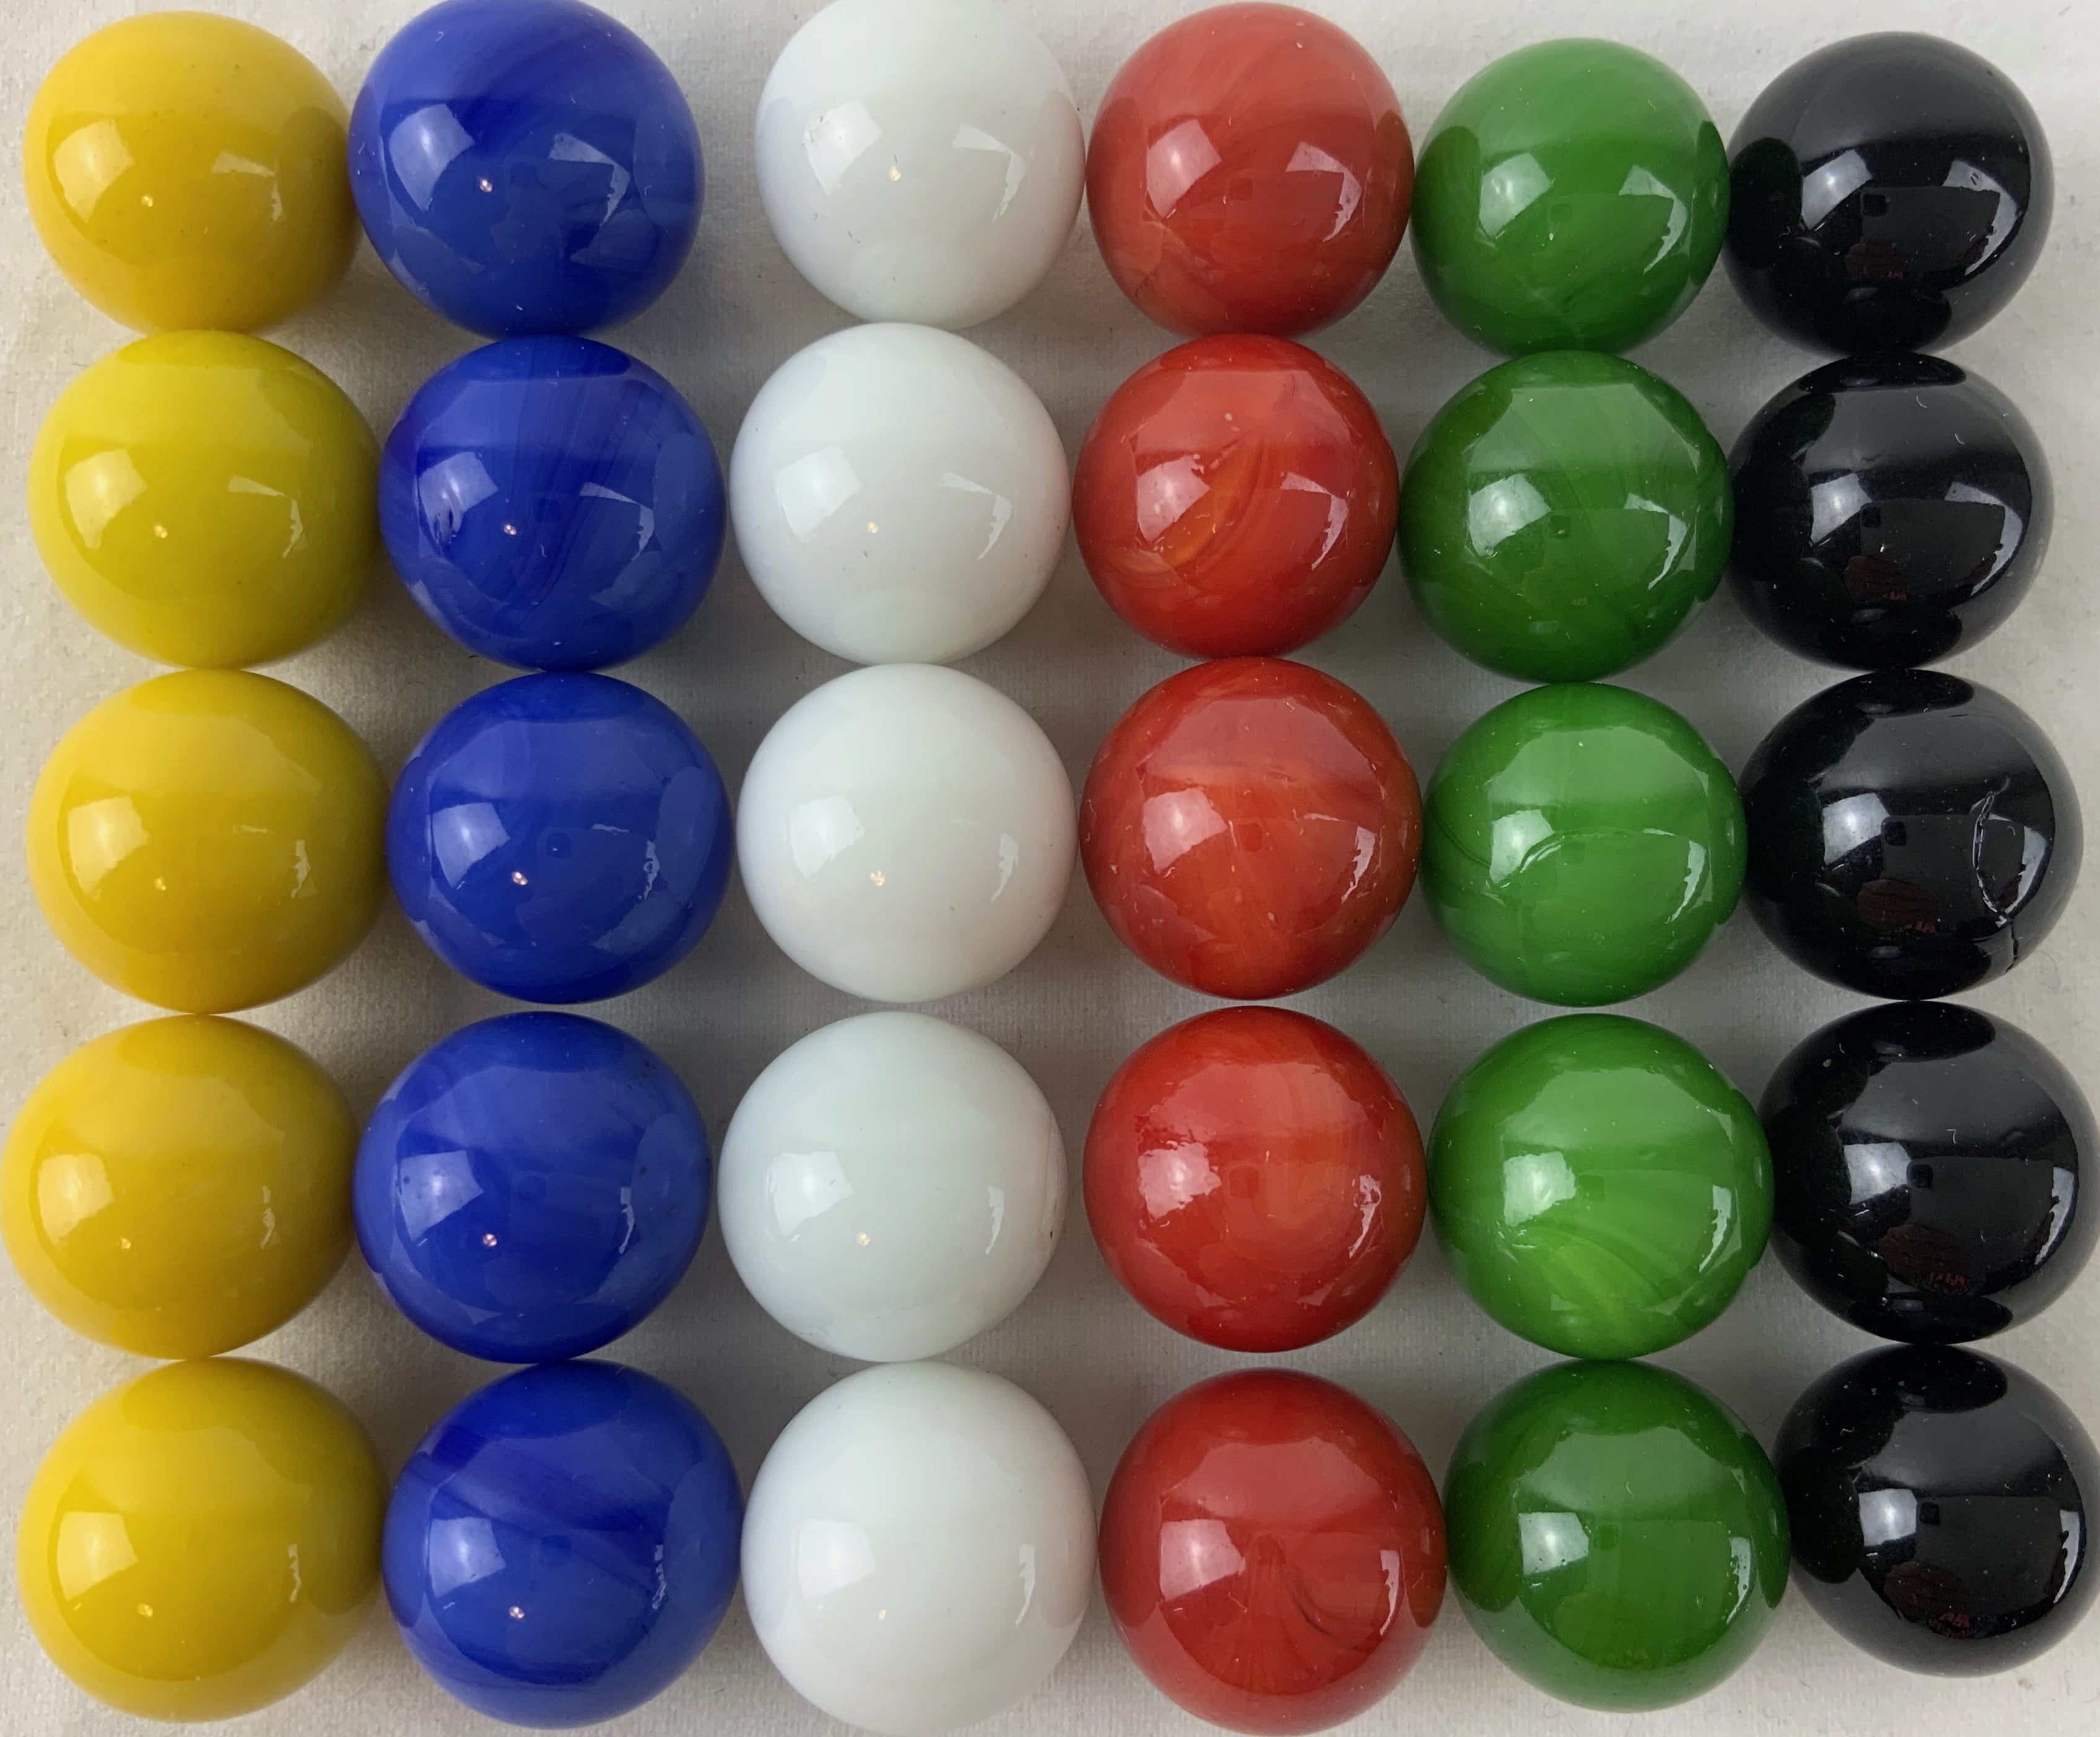 4 Colors of Red, Blue,Yellow and Green Laviesto Game Replacement Balls,120 Pieces 0.53 inch Plastic Game Replacement Marbles Balls Compatible with Hungry Hungry Hippos